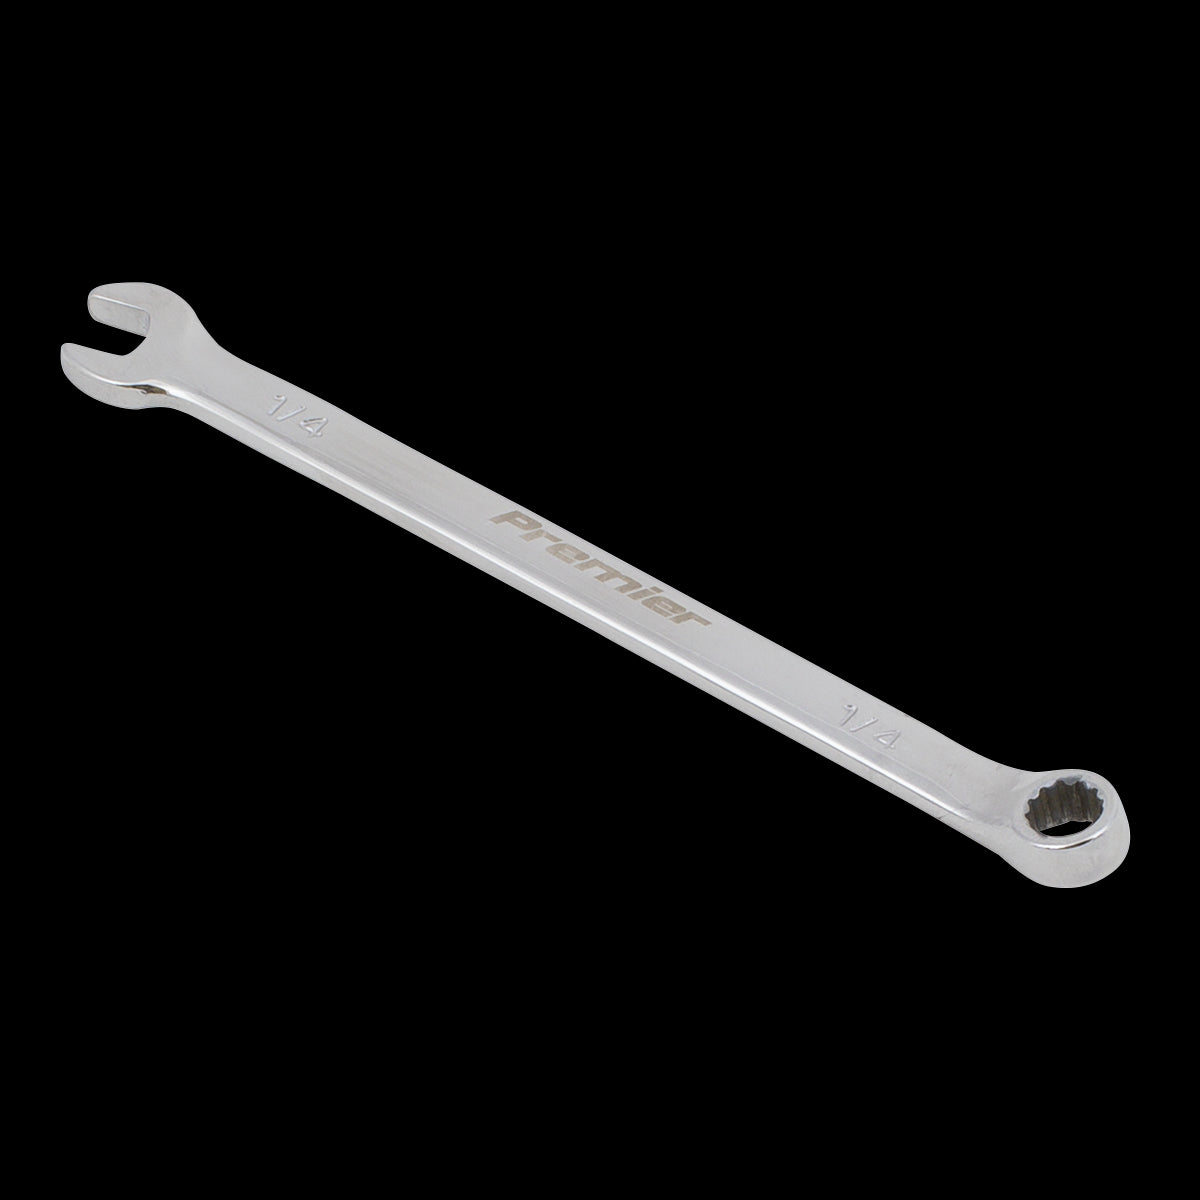 Sealey Premier Combination Spanner 1/4" - Imperial